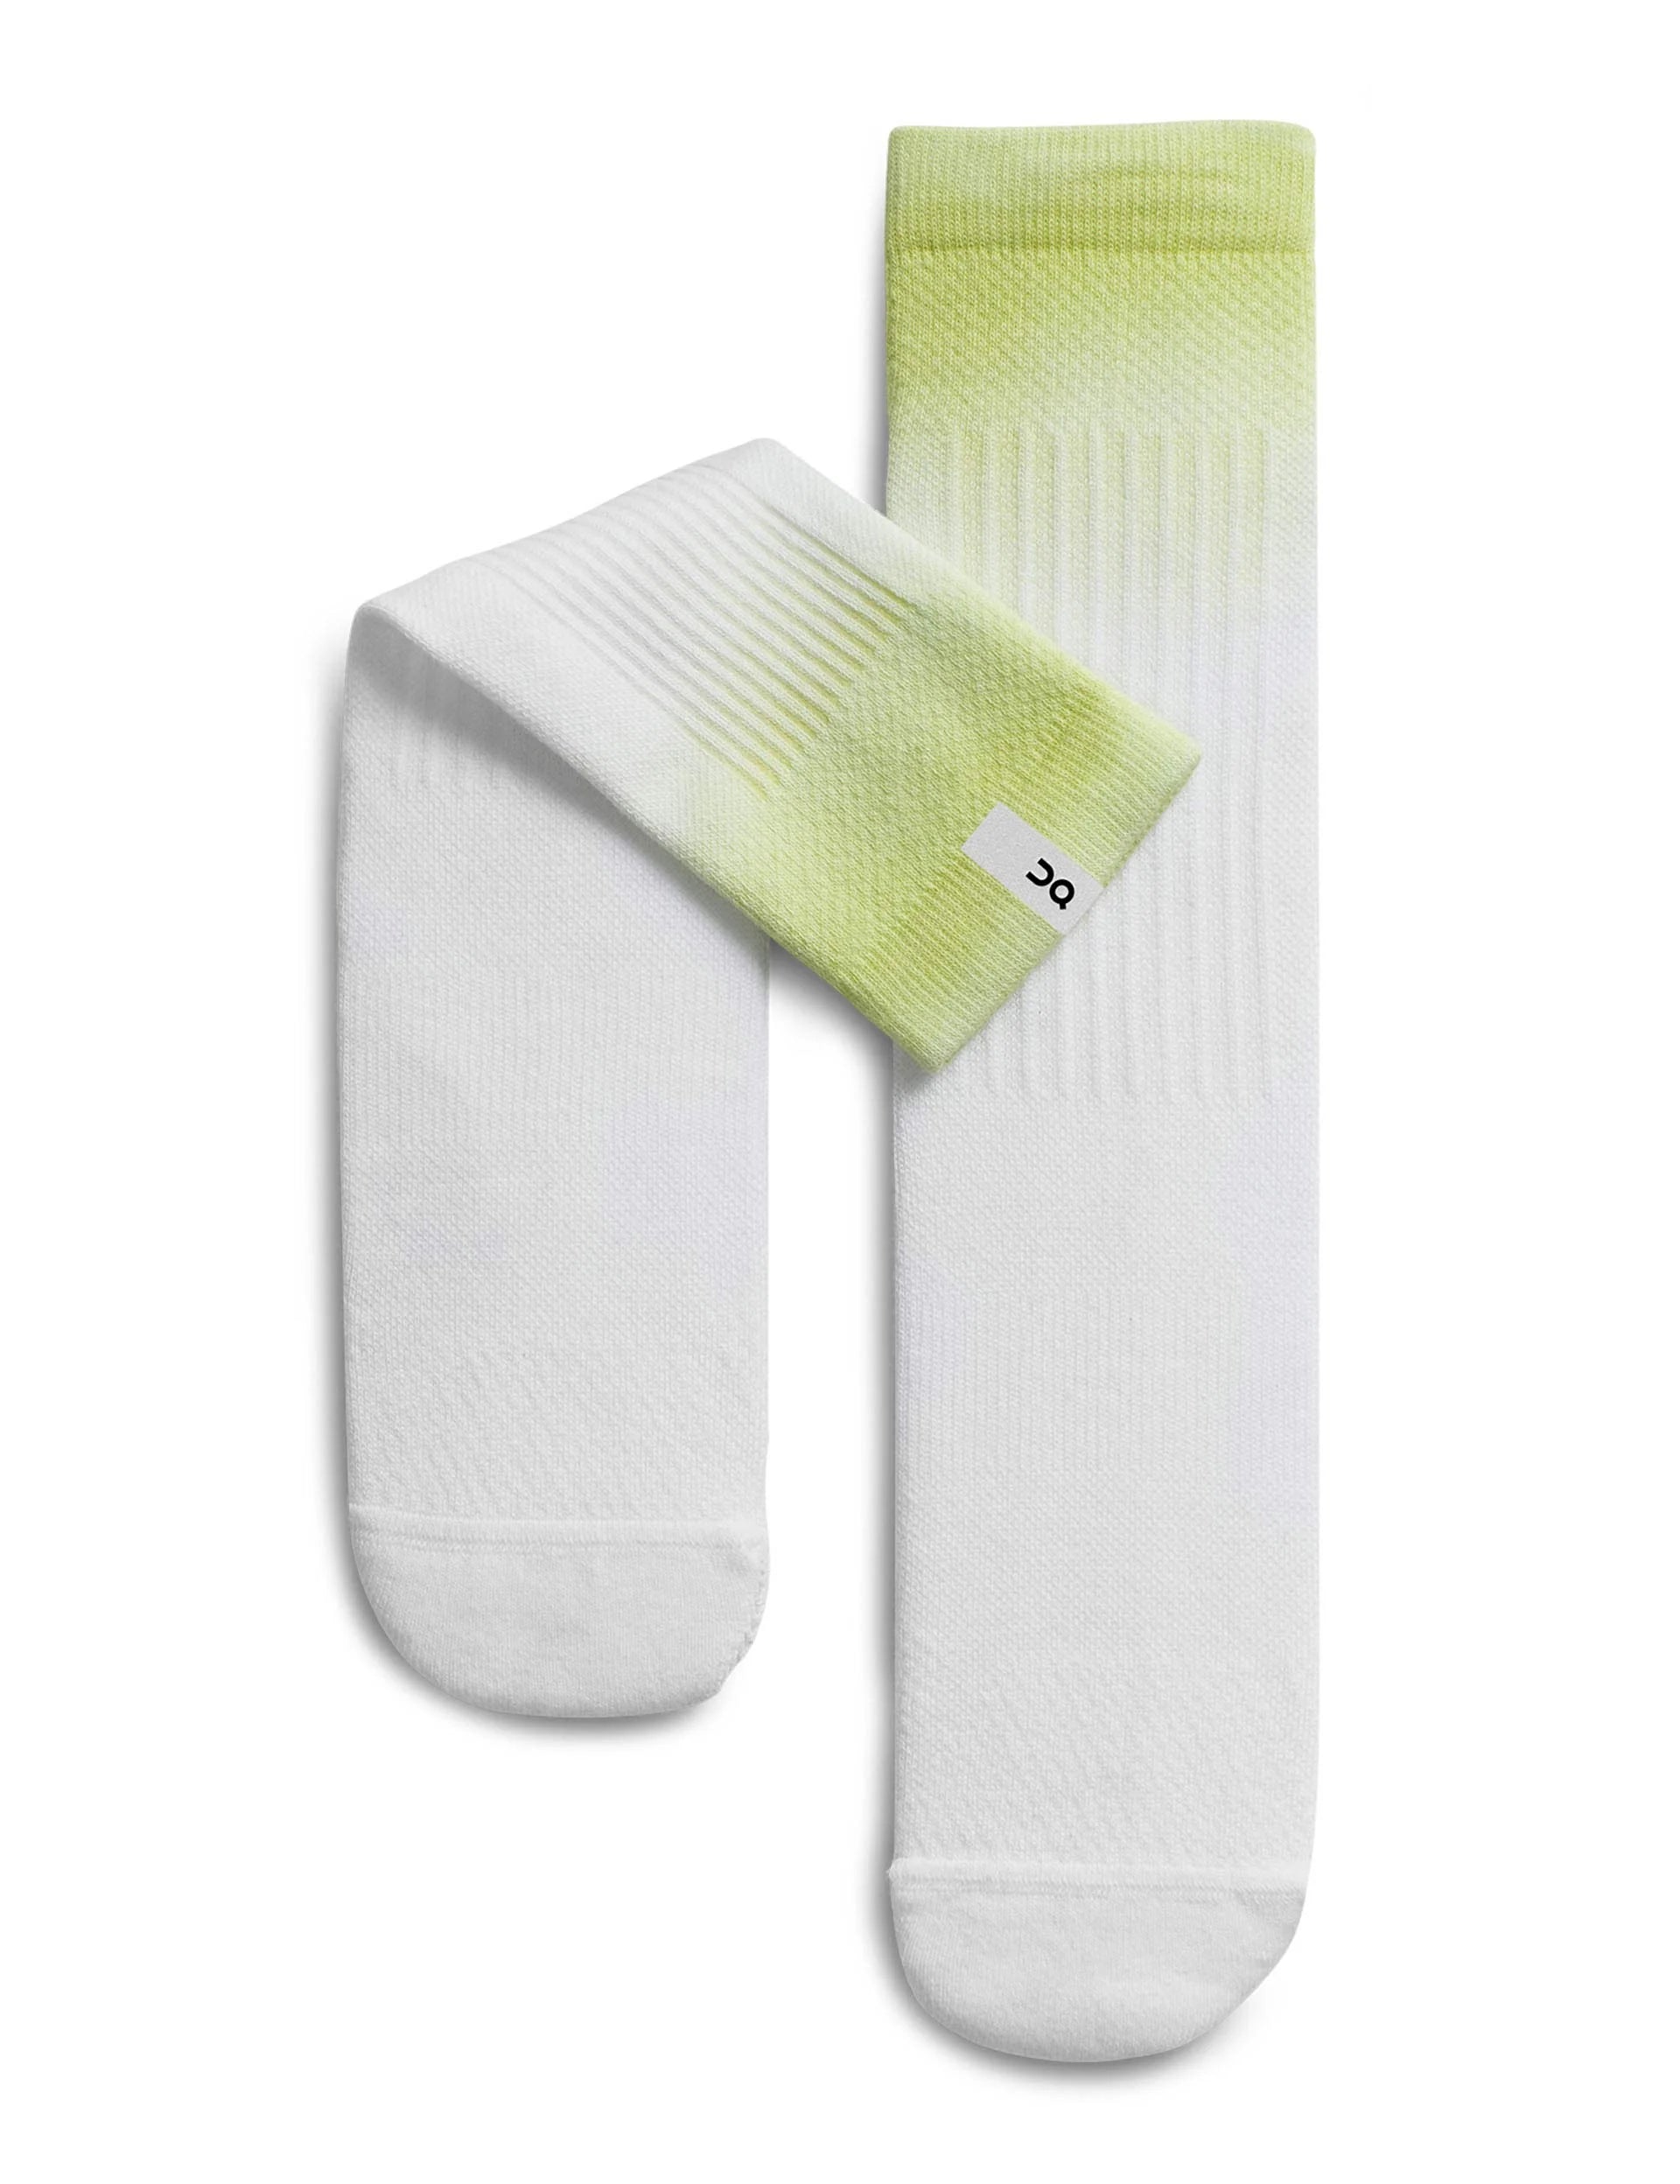 On All-Day Sock Unisex - White/Hay